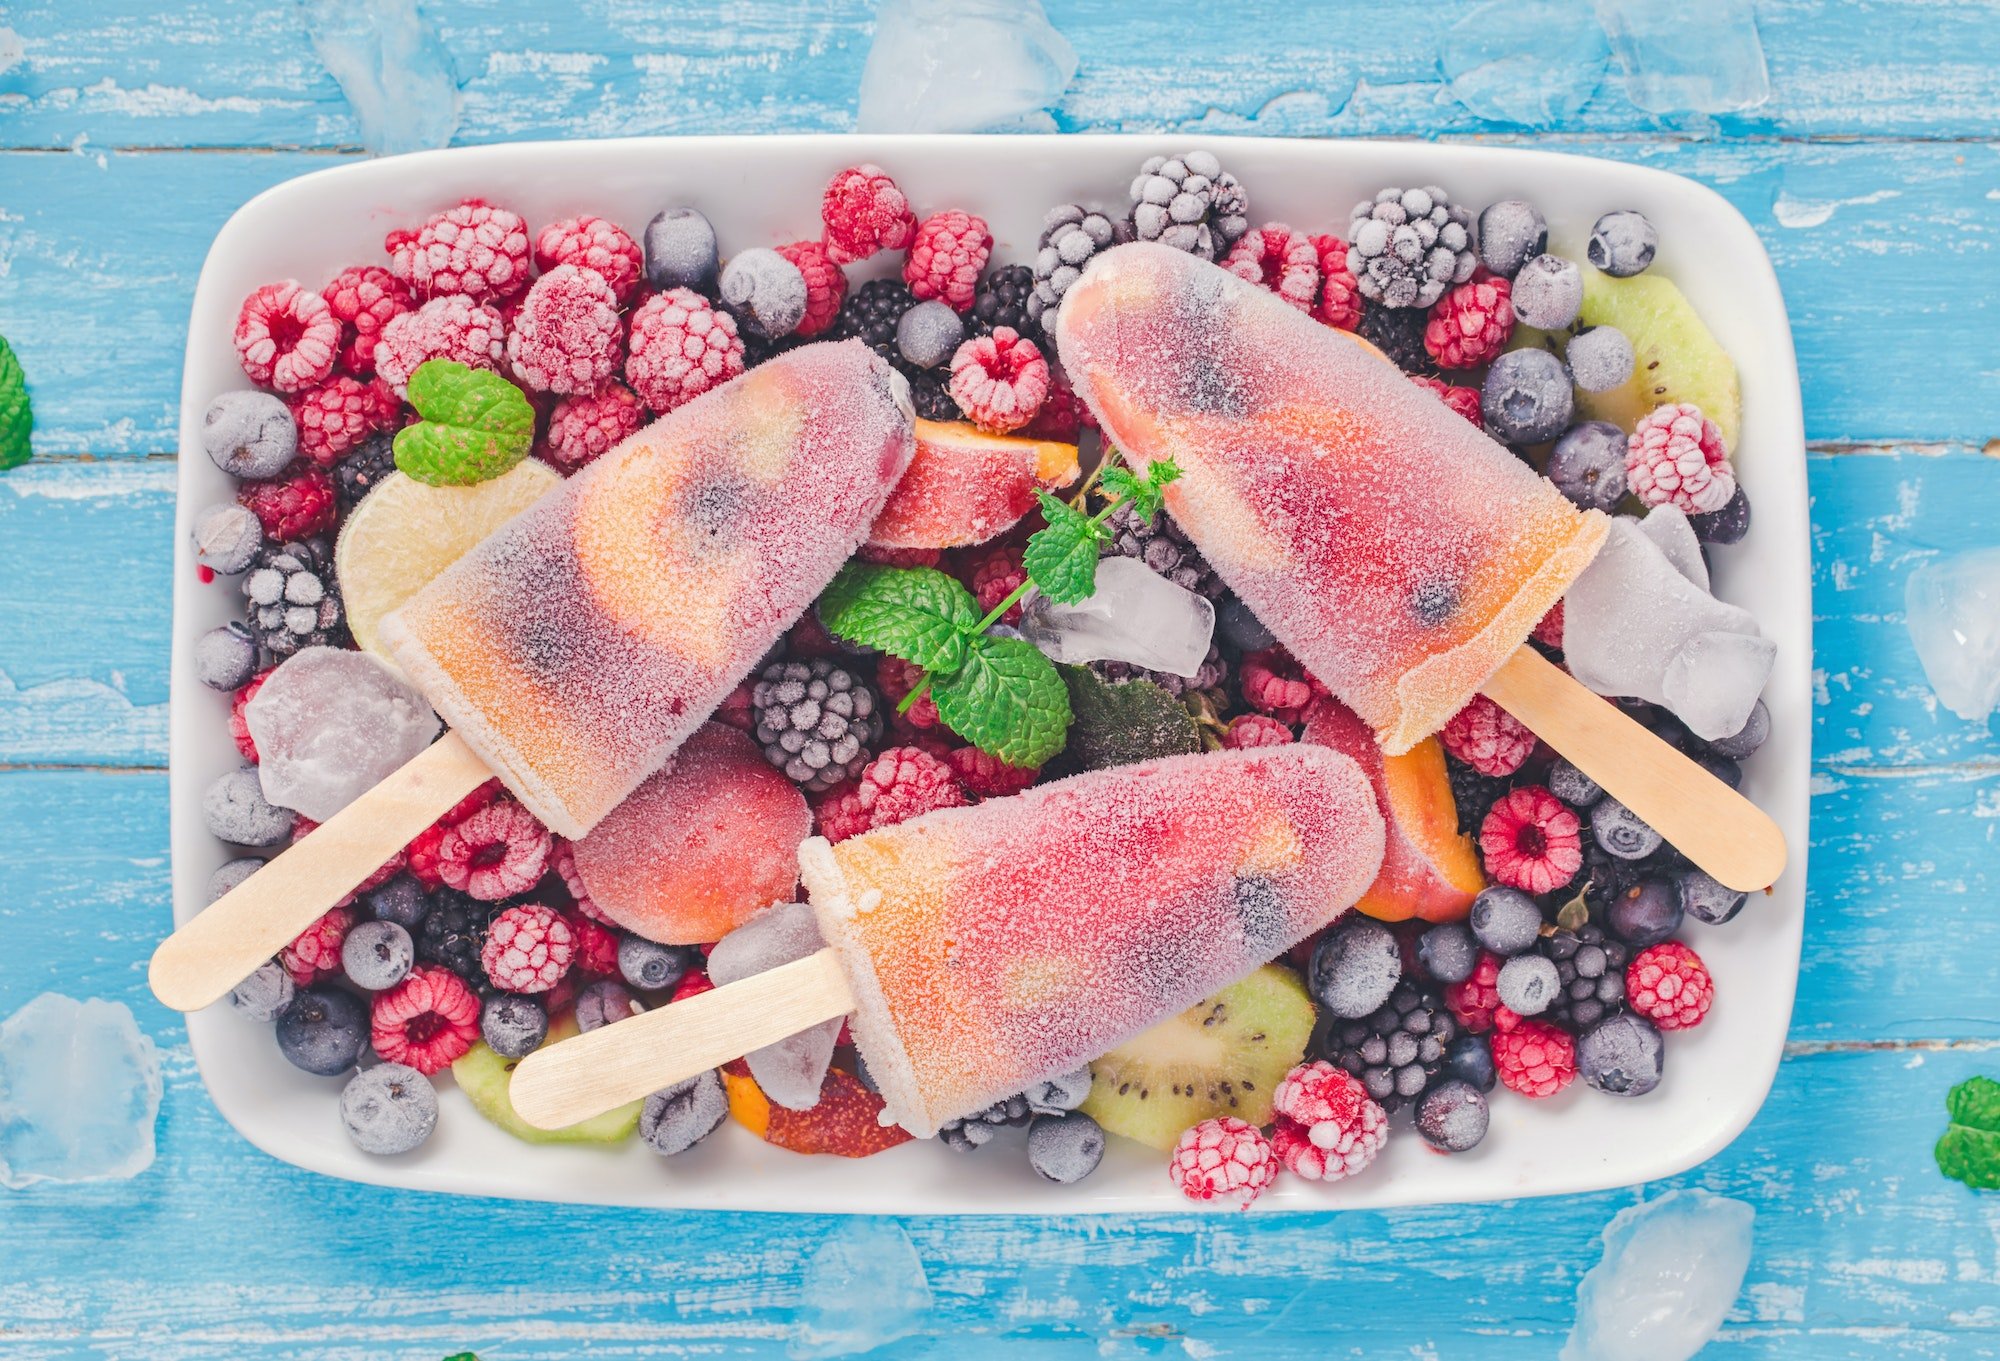 Ice pops on plate with frozen berries above